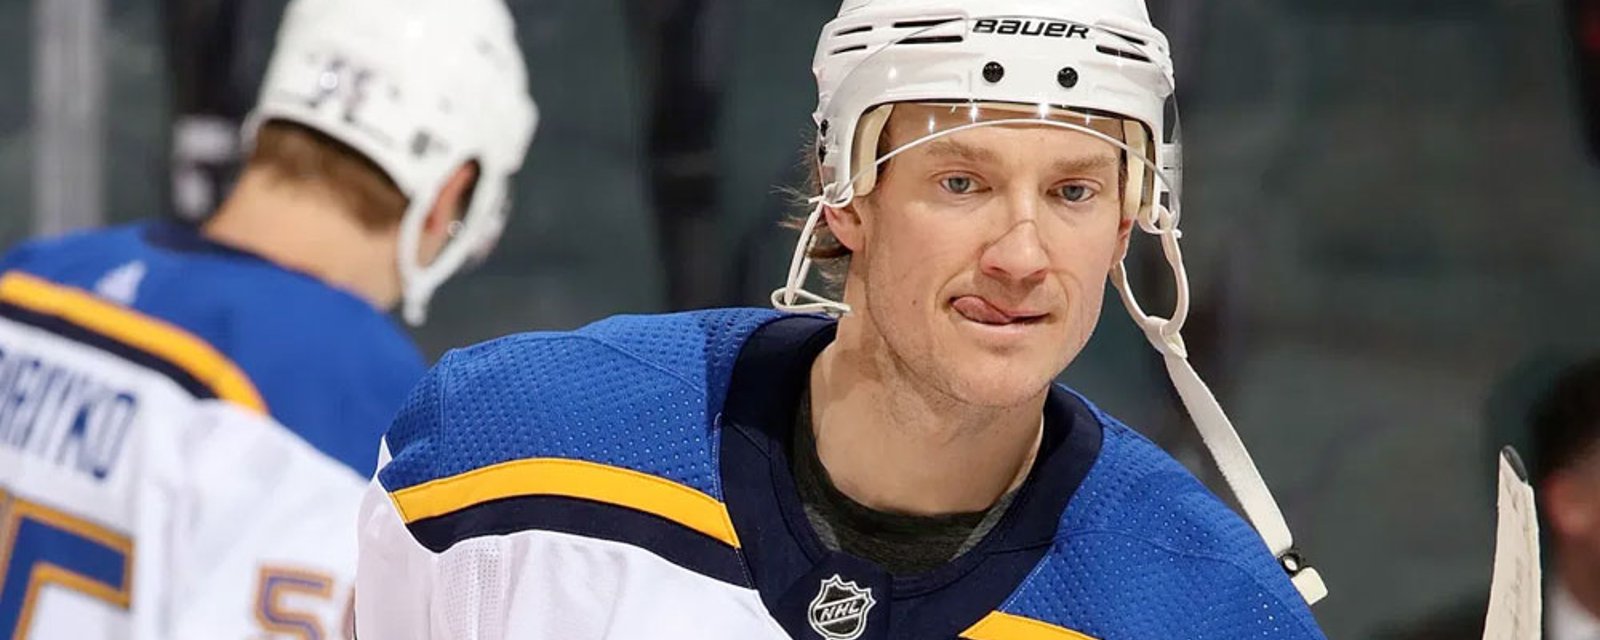 ICYMI: Blues update Jay Bouwmeester's condition to positive